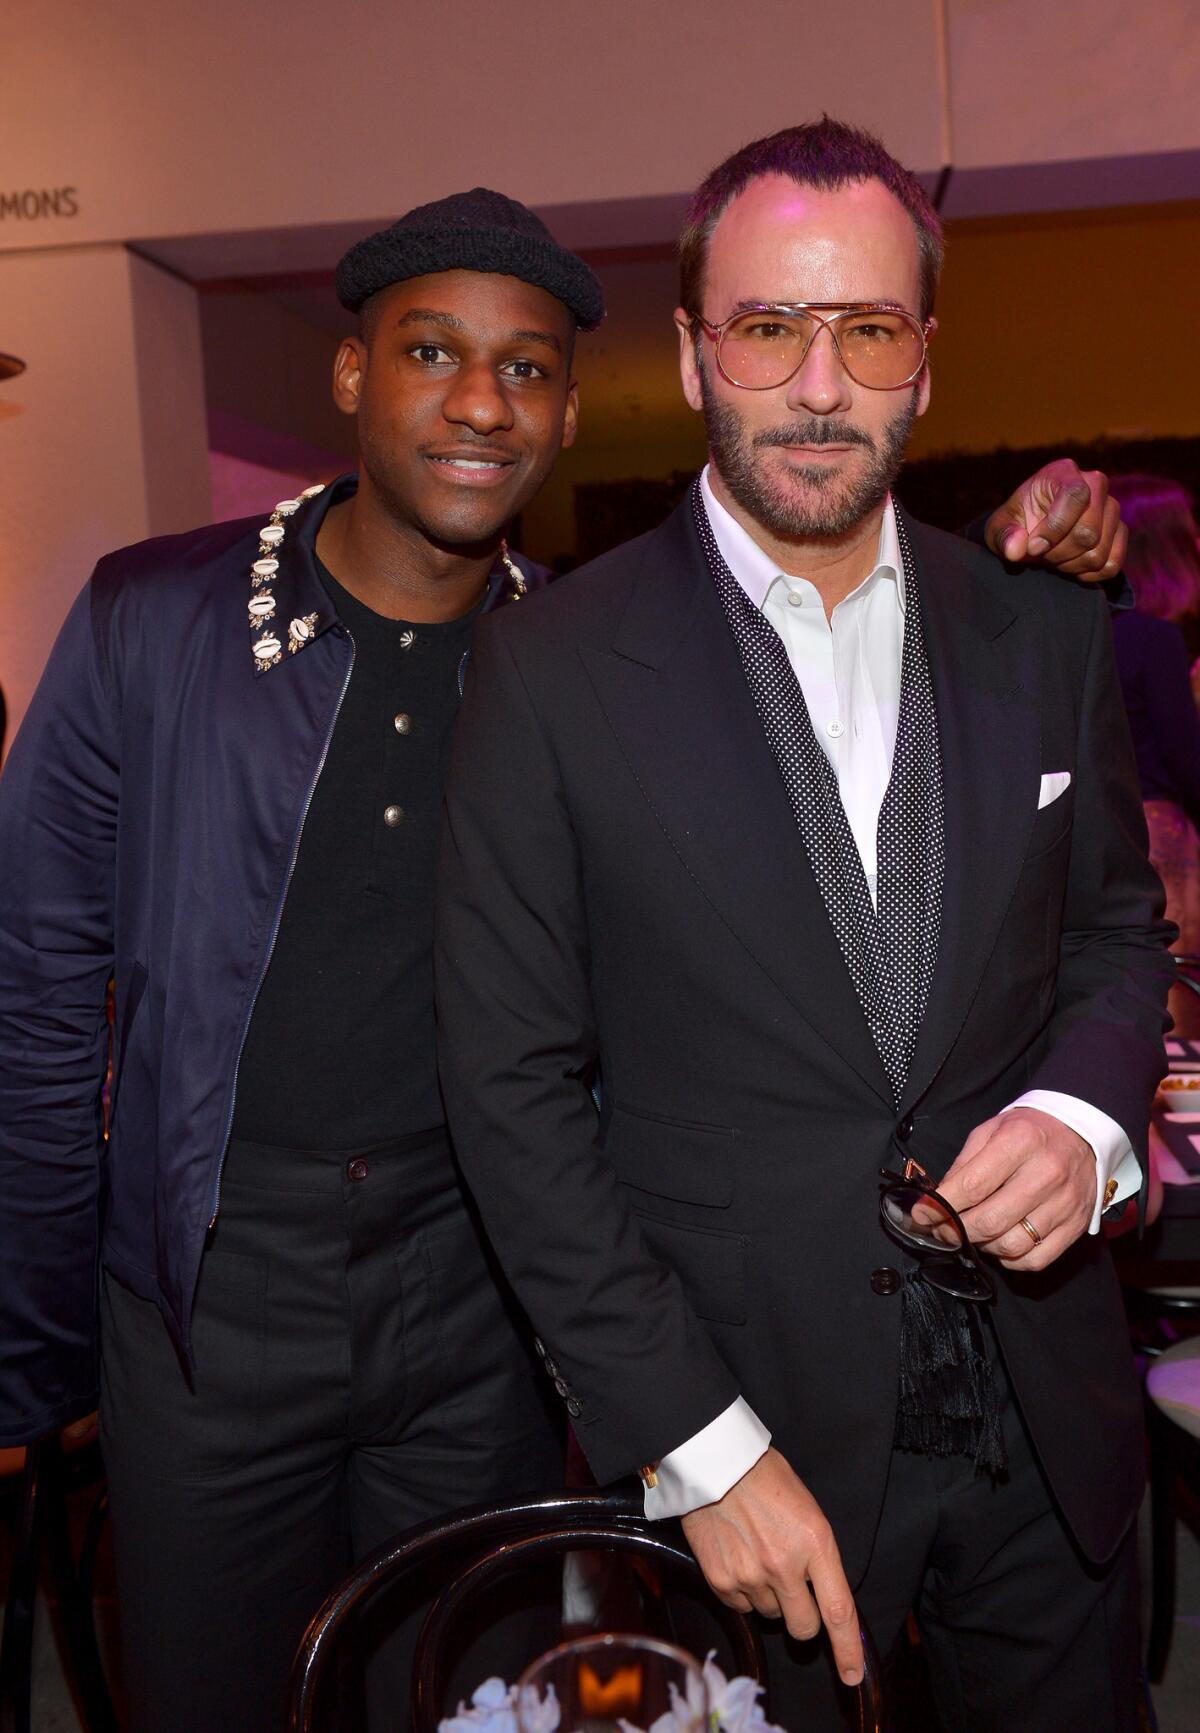 Leon Bridges, left, and Tom Ford at the Hammer Museum gala.